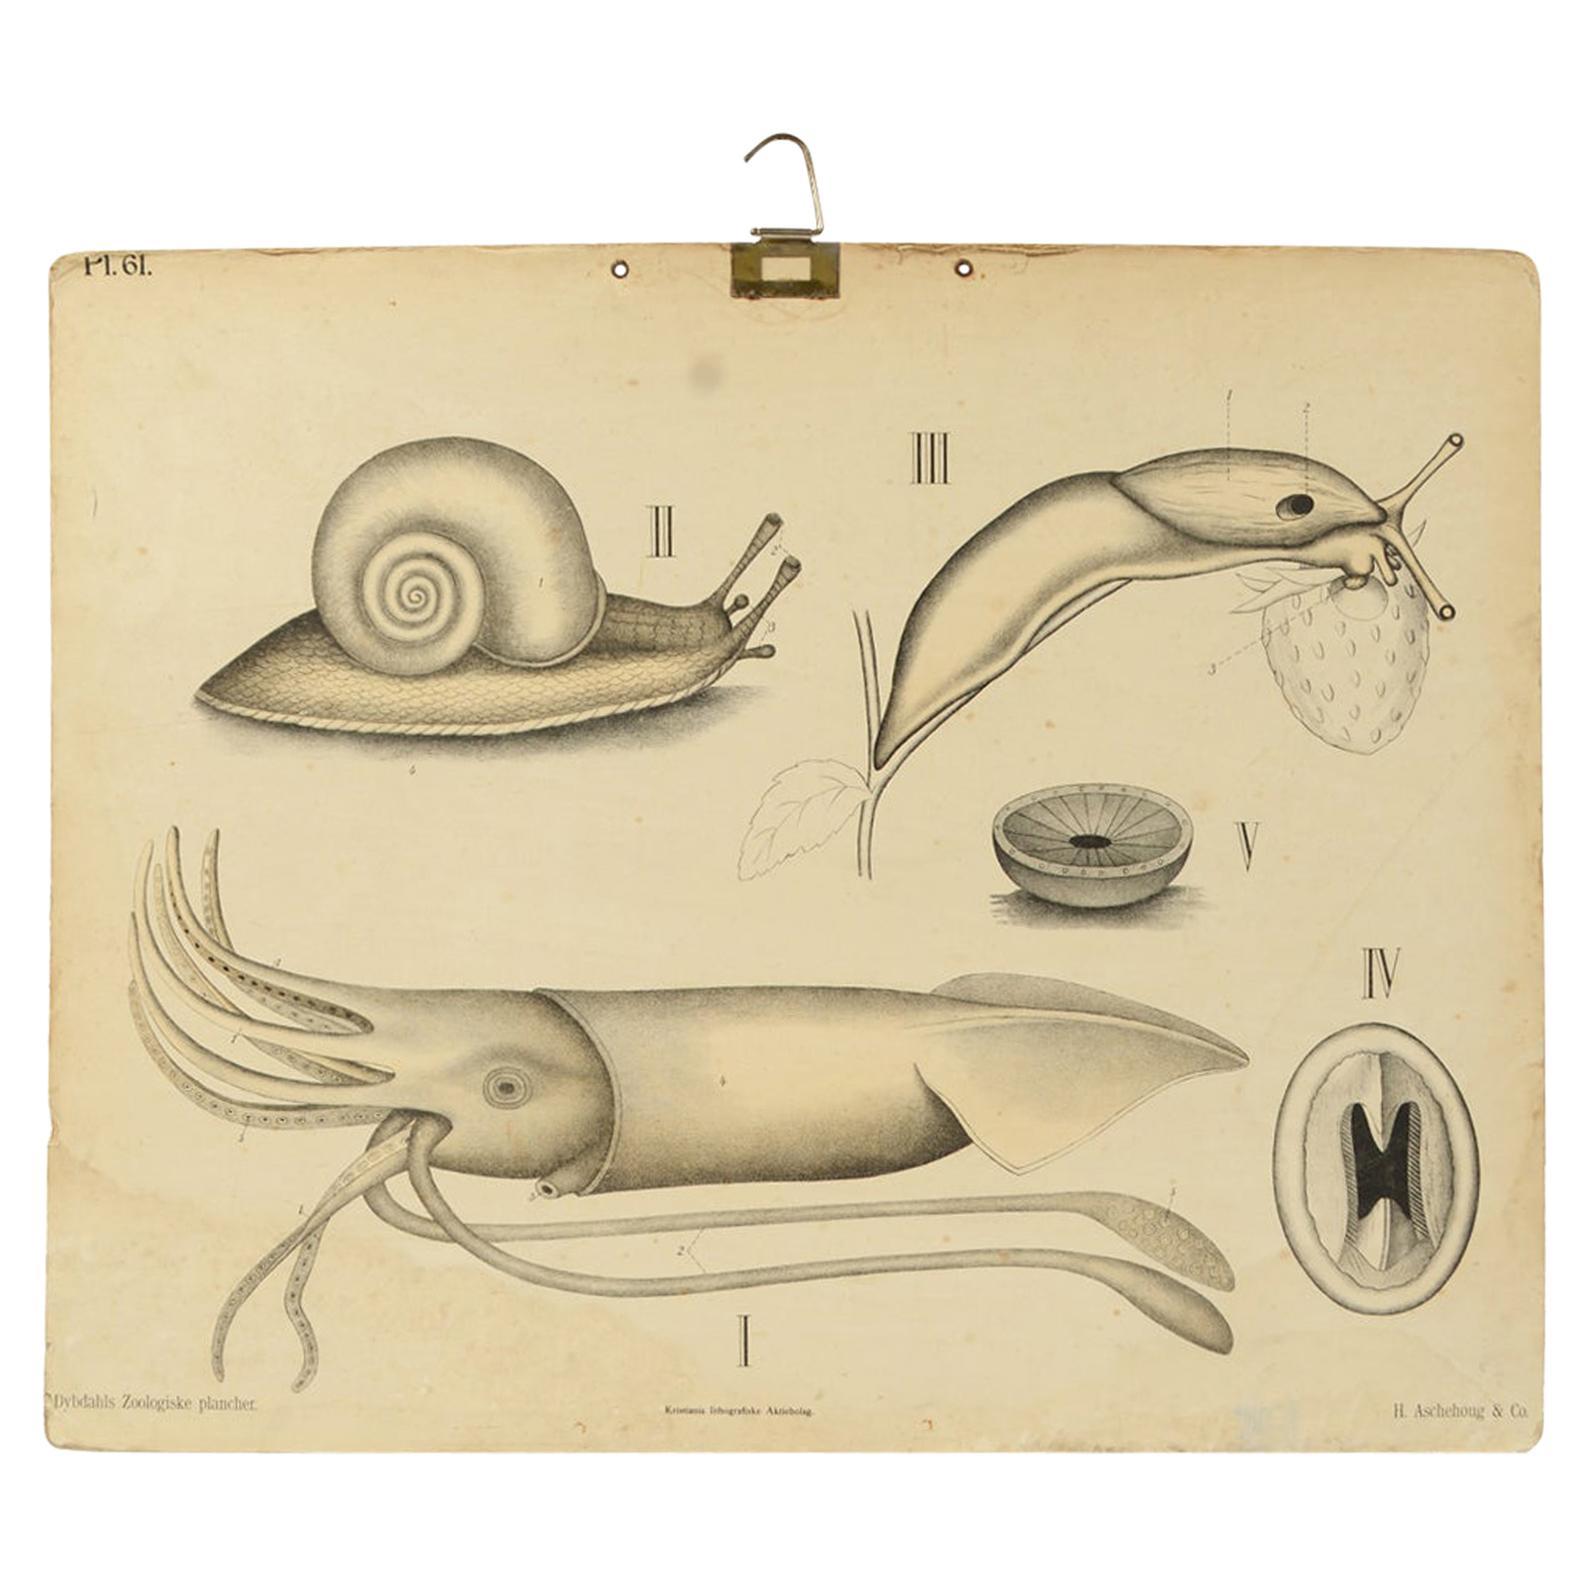 Zoological Lithograph of molluscs 1925 on Cardboard by H Aschehoug & Co, Norway